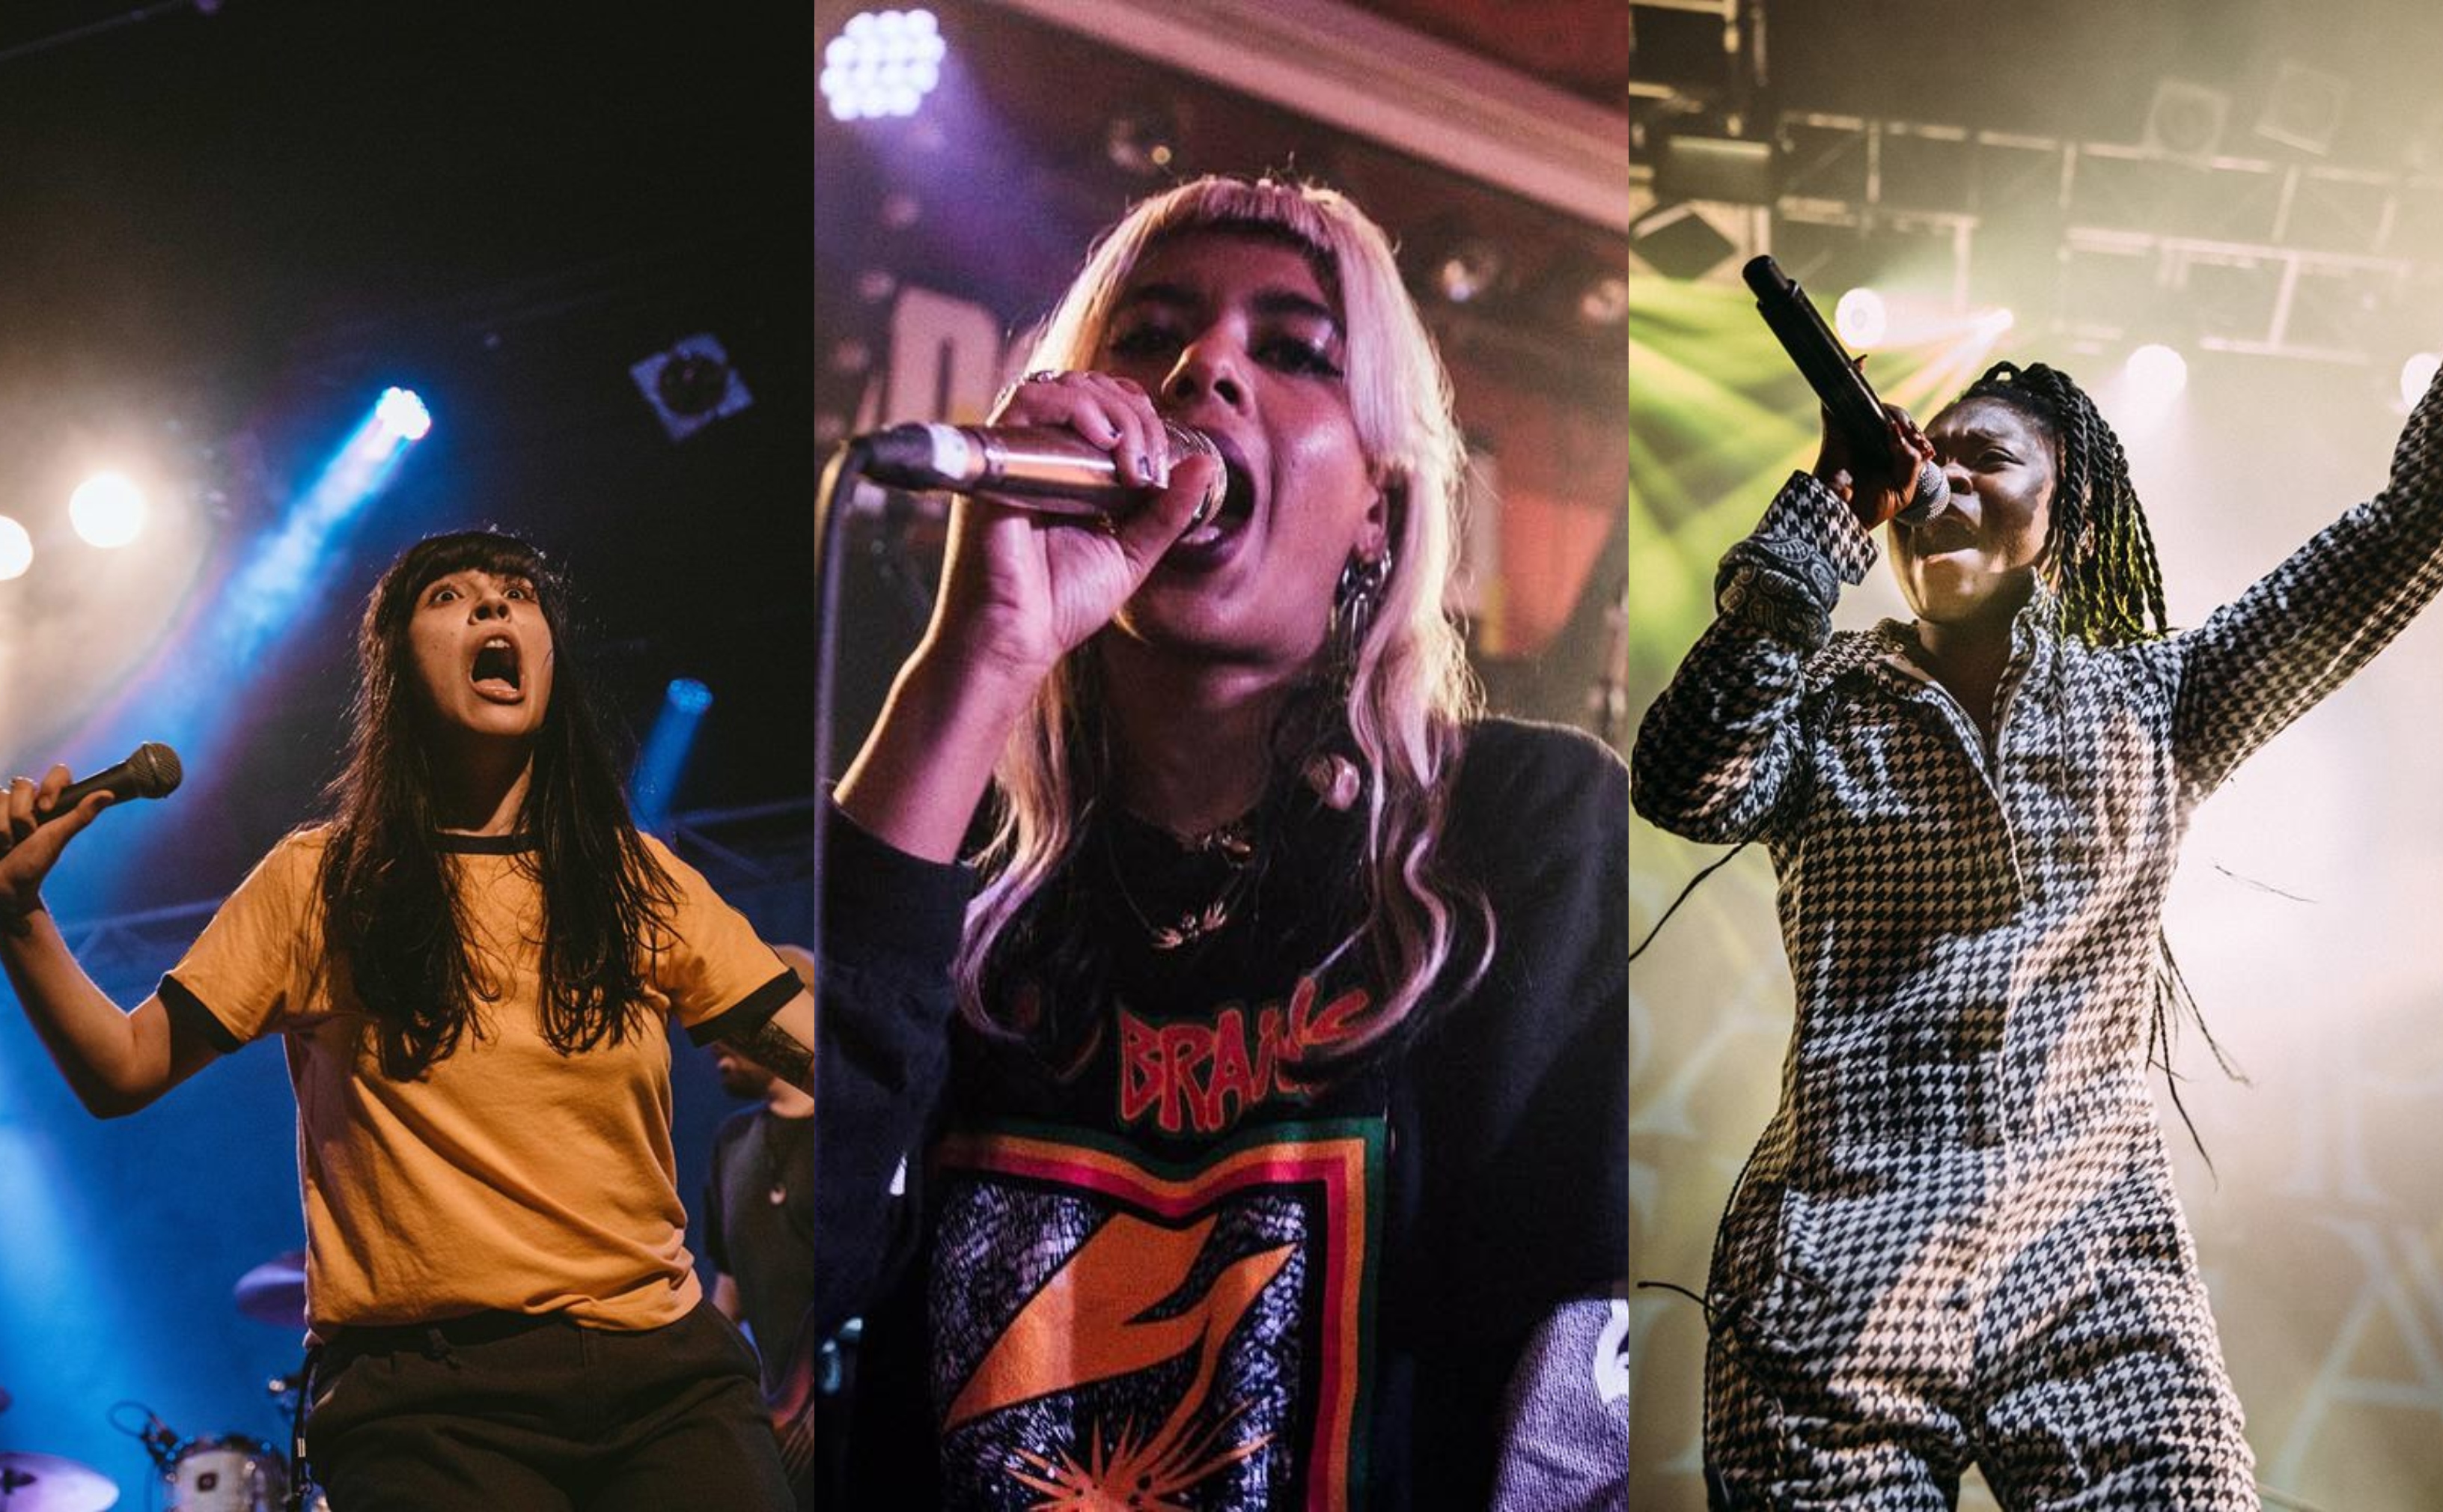 It’s time to get your votes in for the 2018 National Live Music Awards